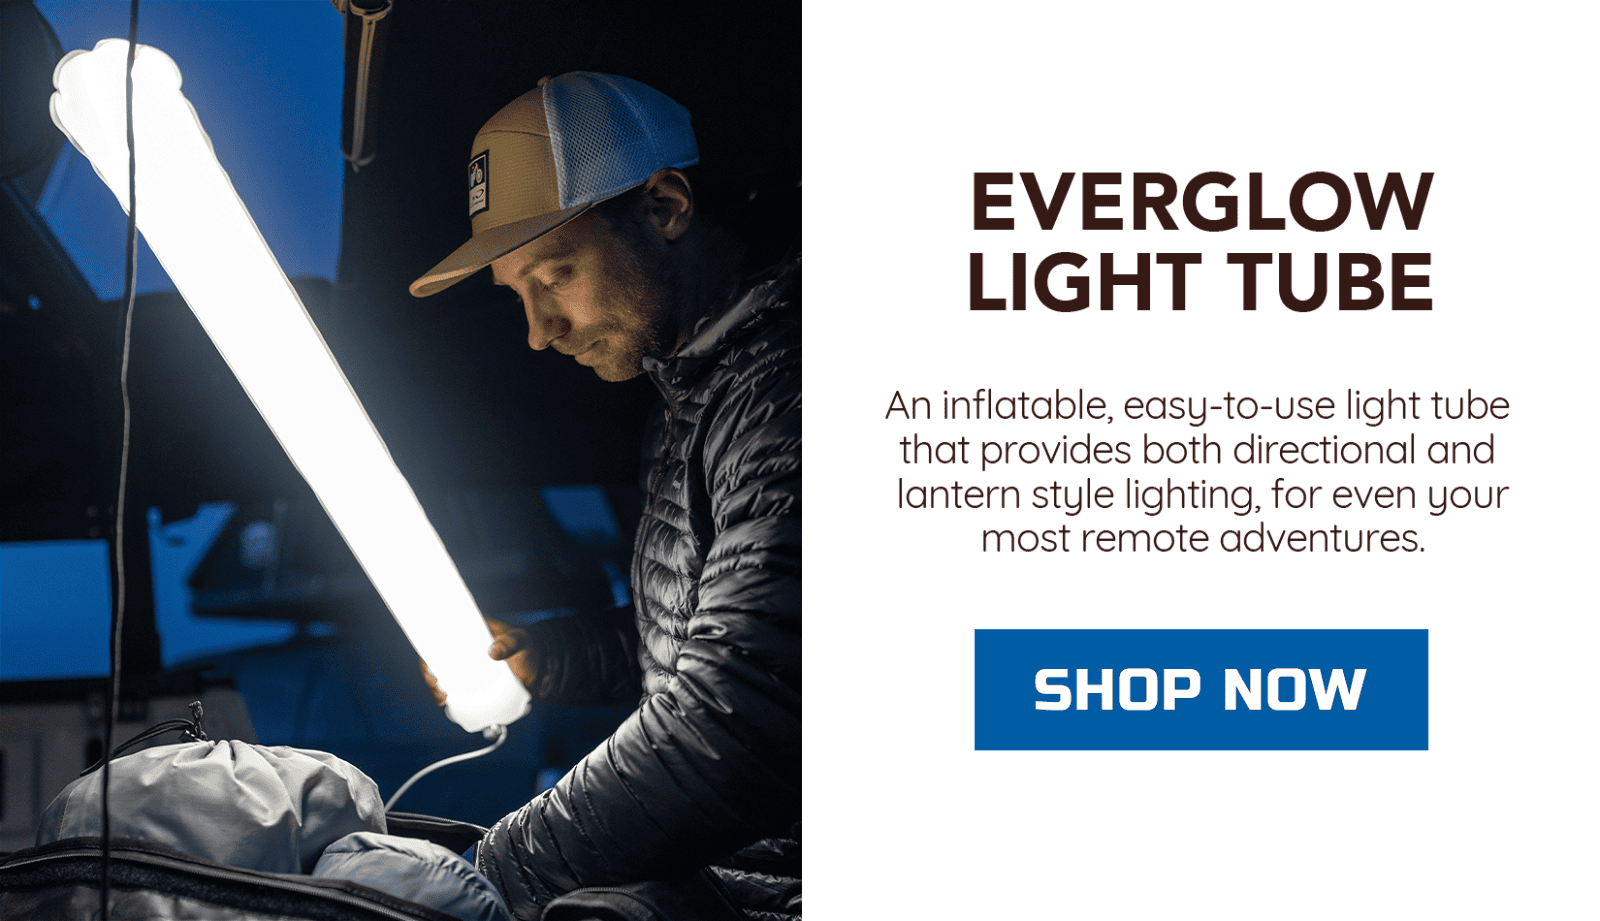 EVERGLOW LIGHT TUBE: An inflatable, easy-to-use light tube that provides both directional and lantern style lighting, for even your most remote adventures.